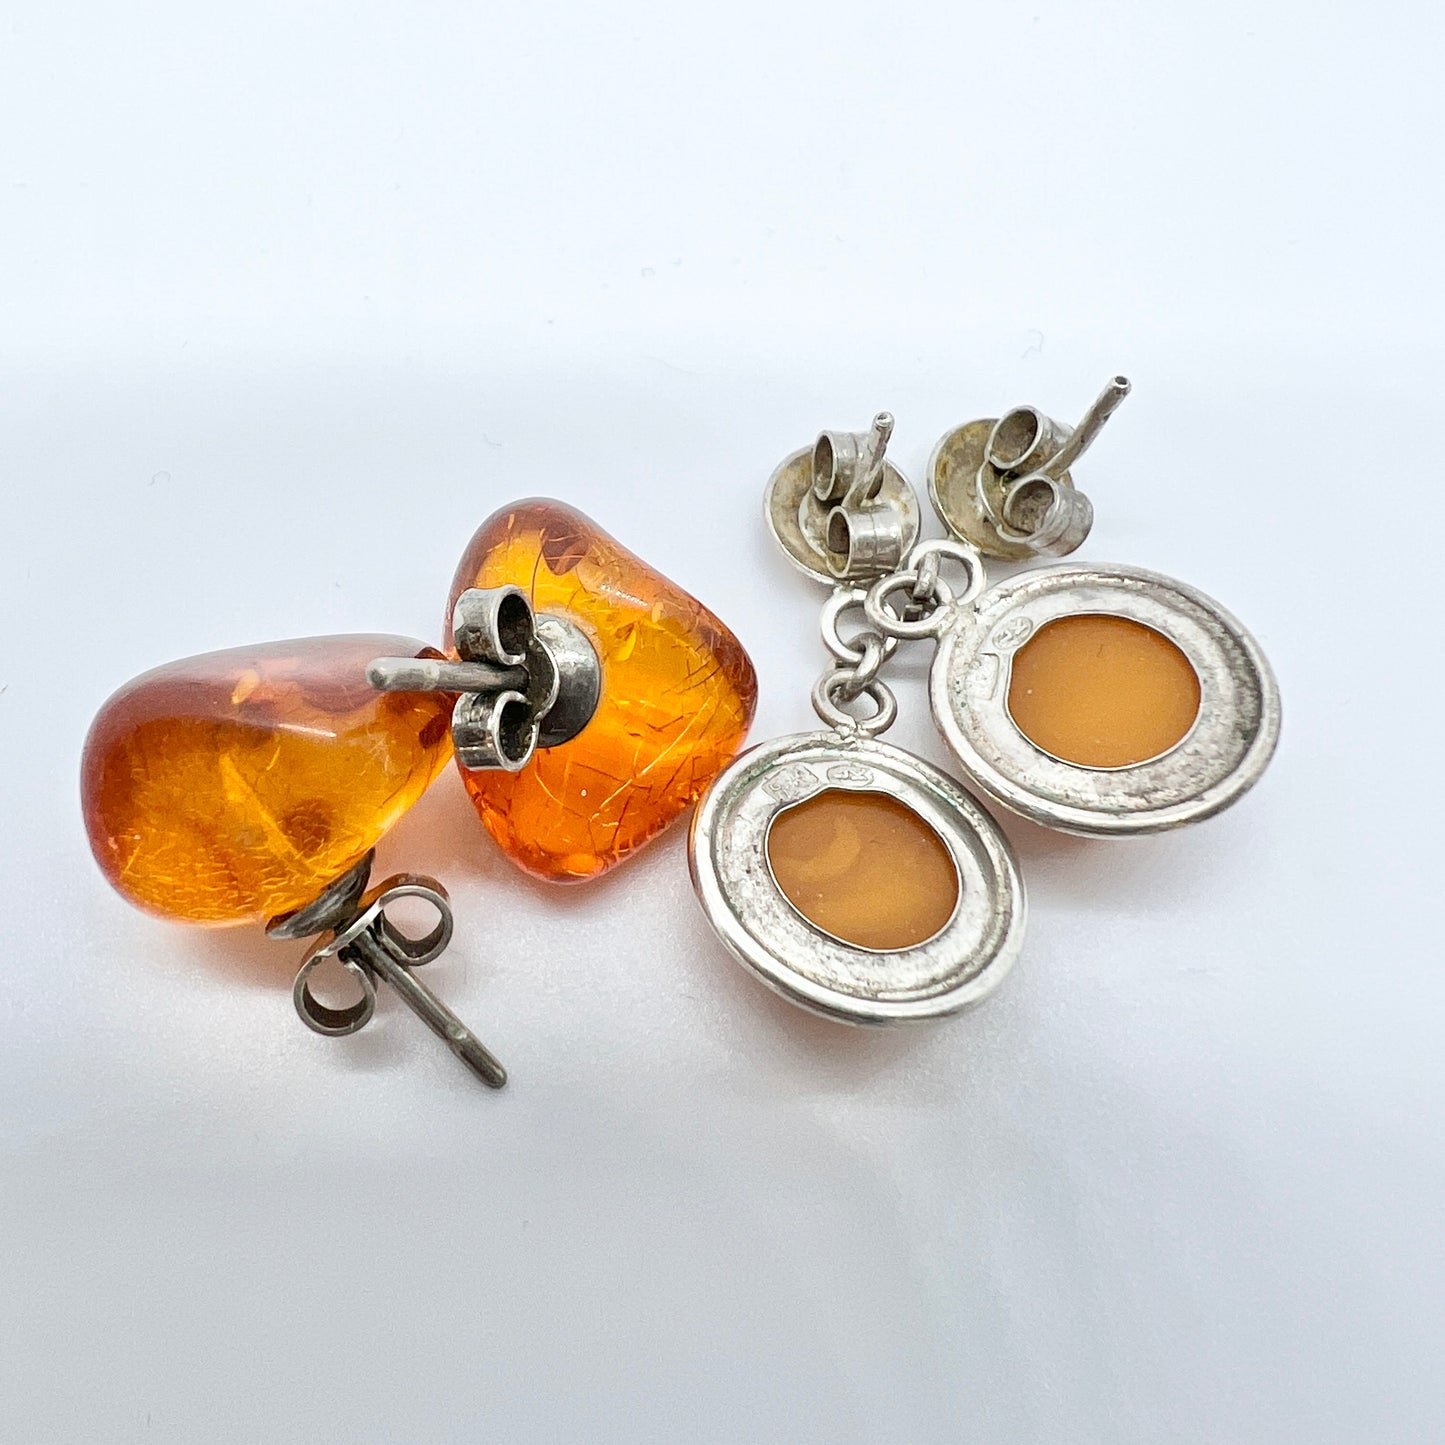 Poland. Vintage Solid Silver Baltic Amber Earrings.